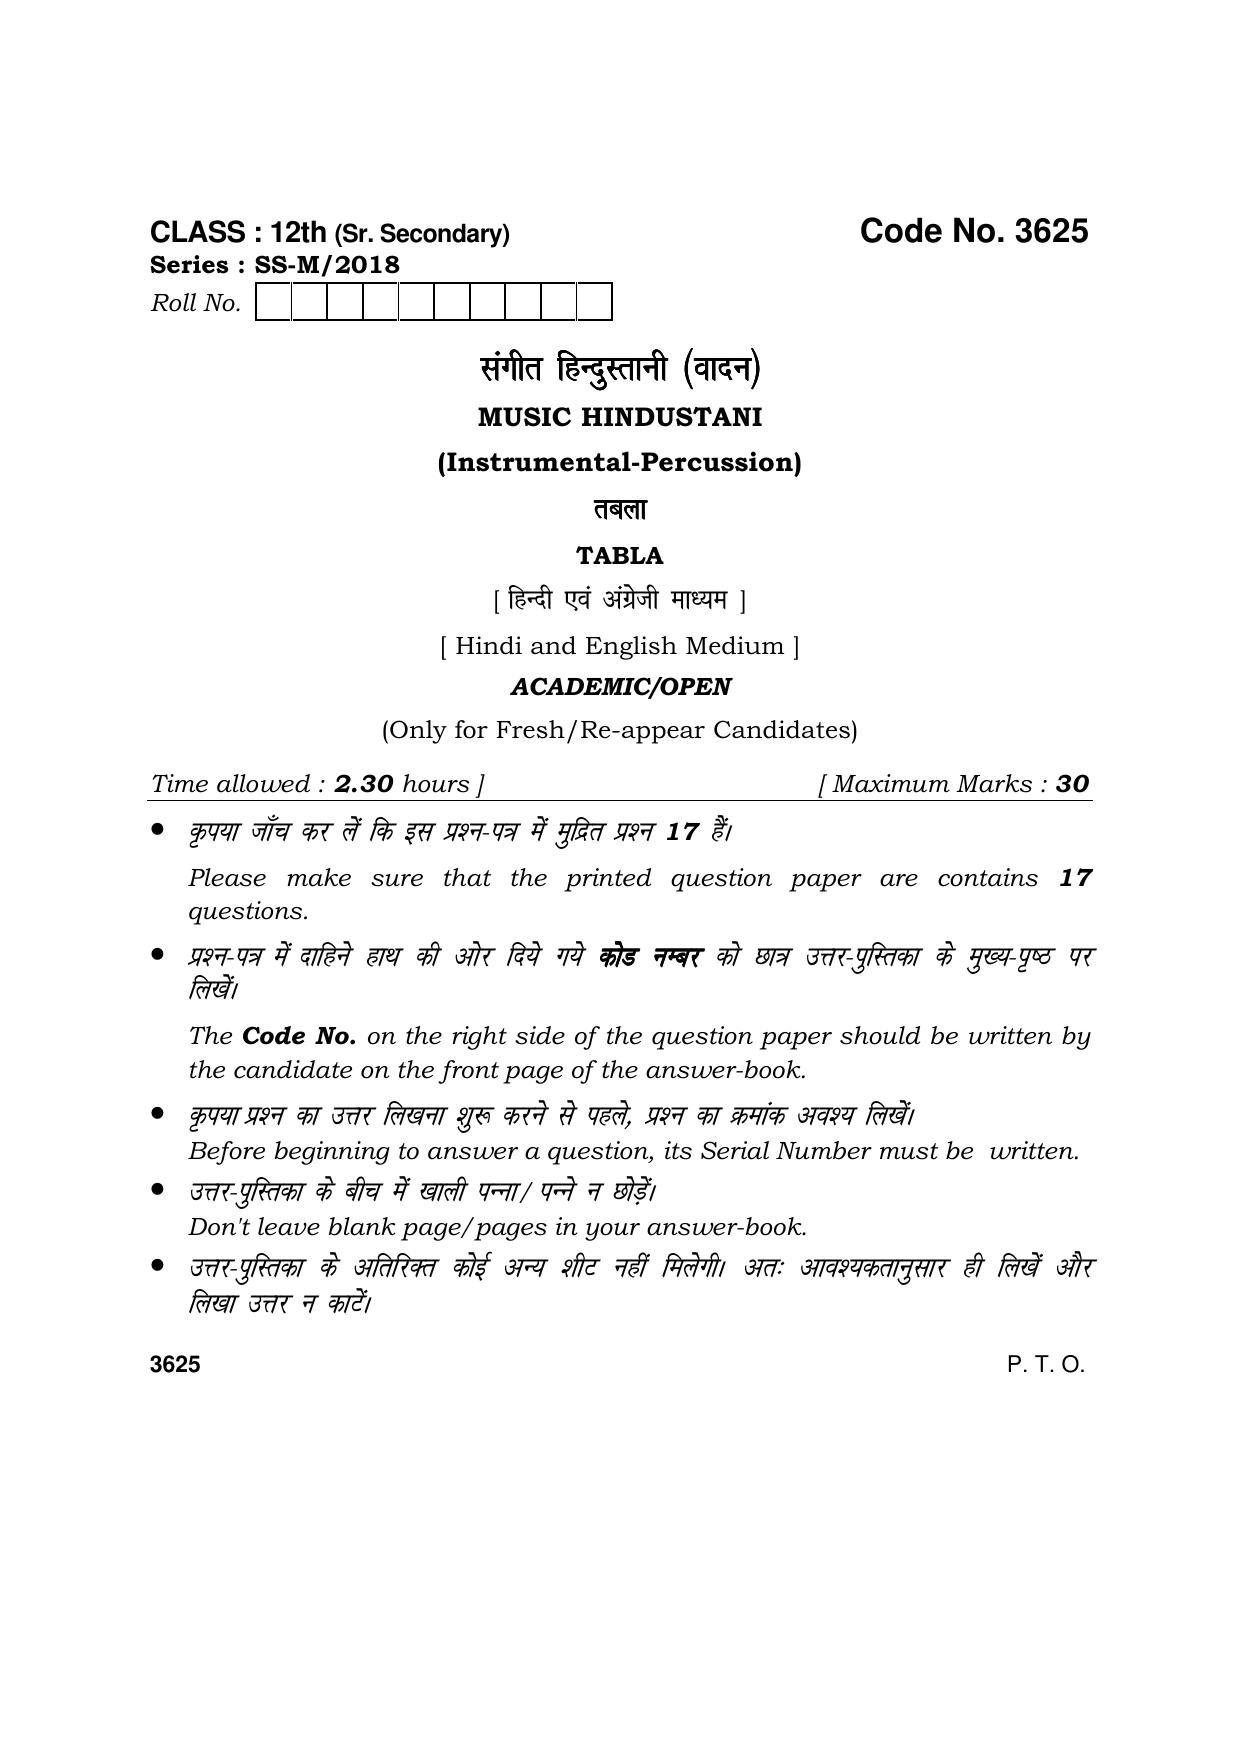 Haryana Board HBSE Class 12 Music Hindustani (Percussion) 2018 Question Paper - Page 1